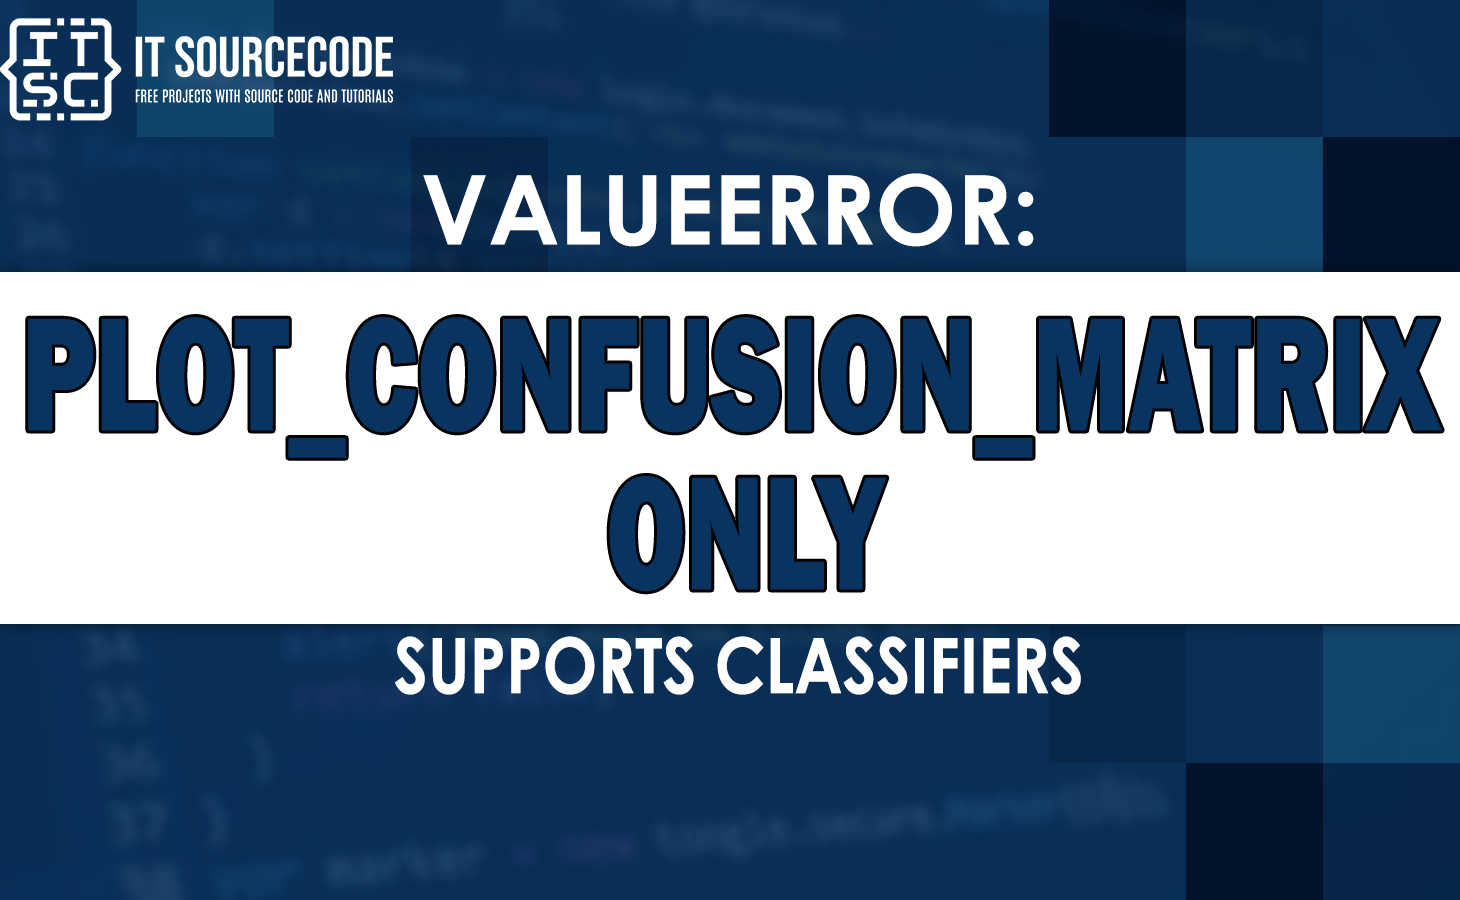 Valueerror plot_confusion_matrix only supports classifiers